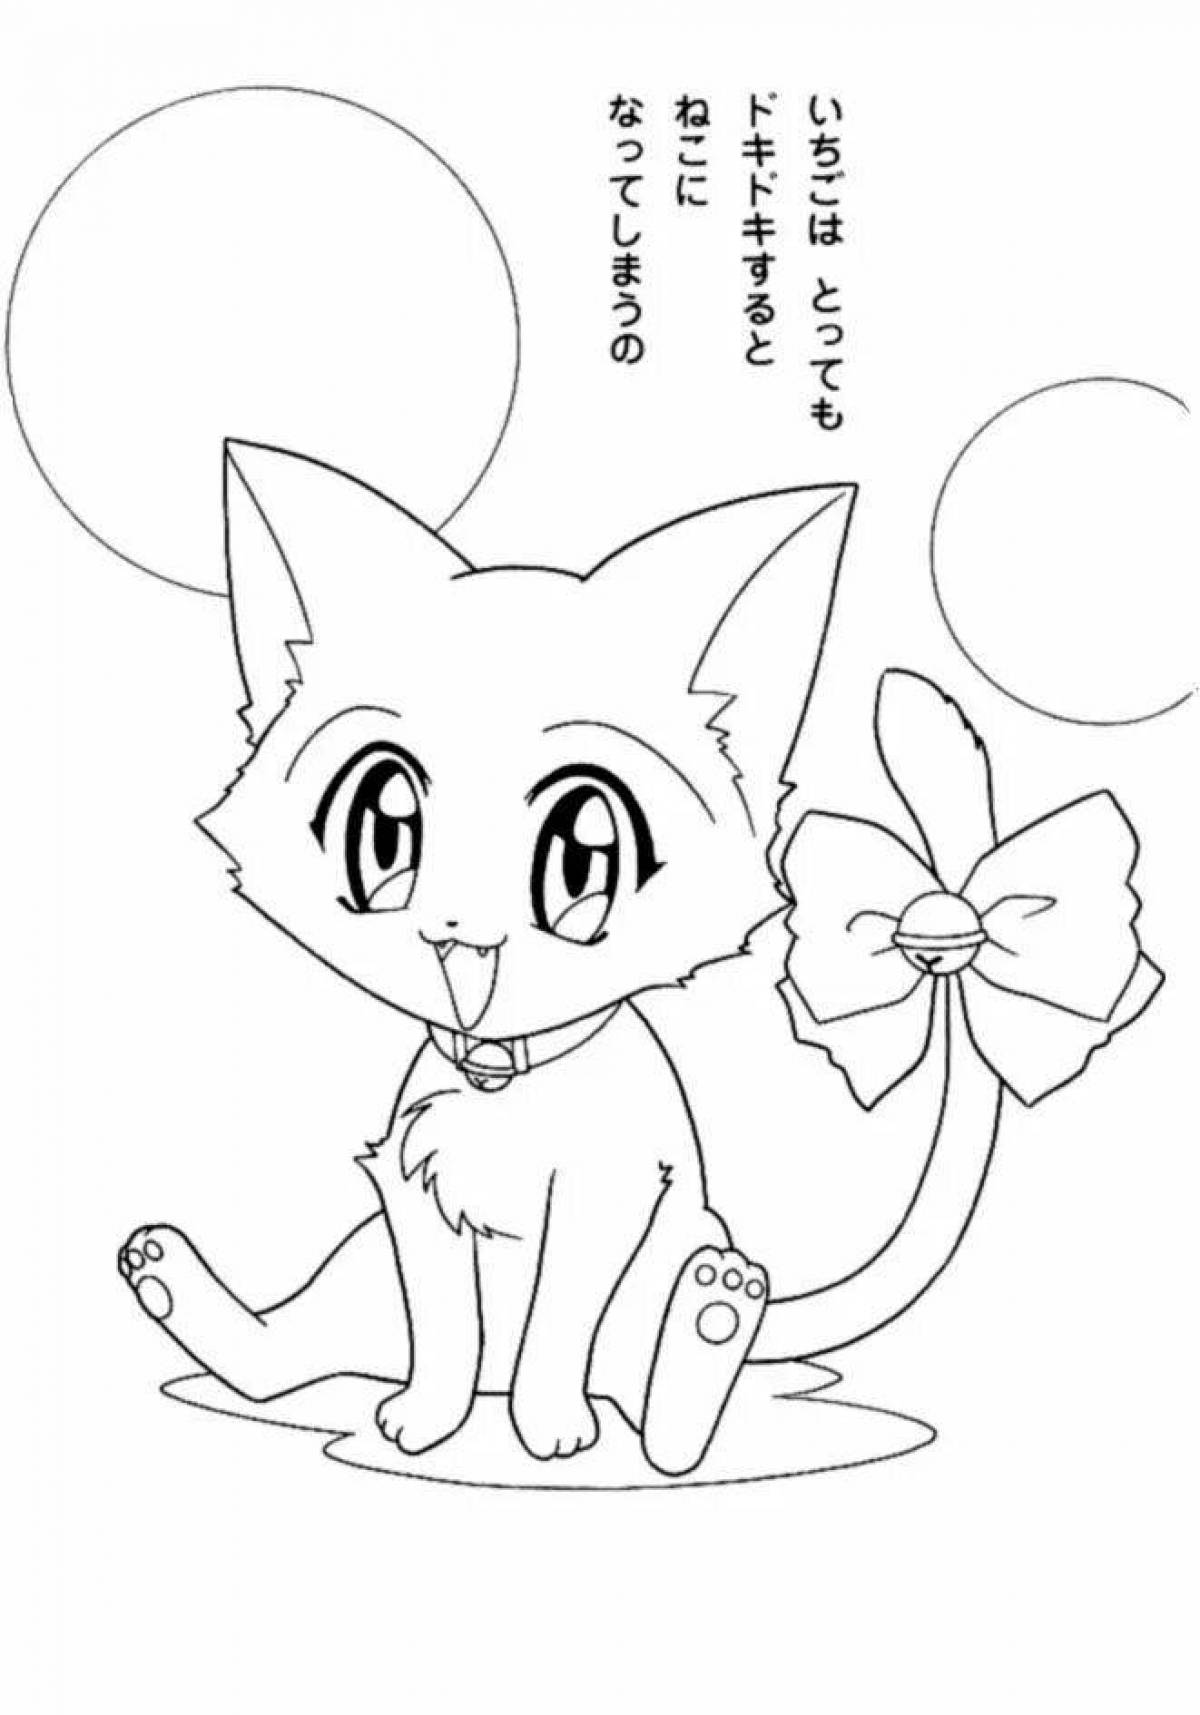 Anime cat fashion coloring page